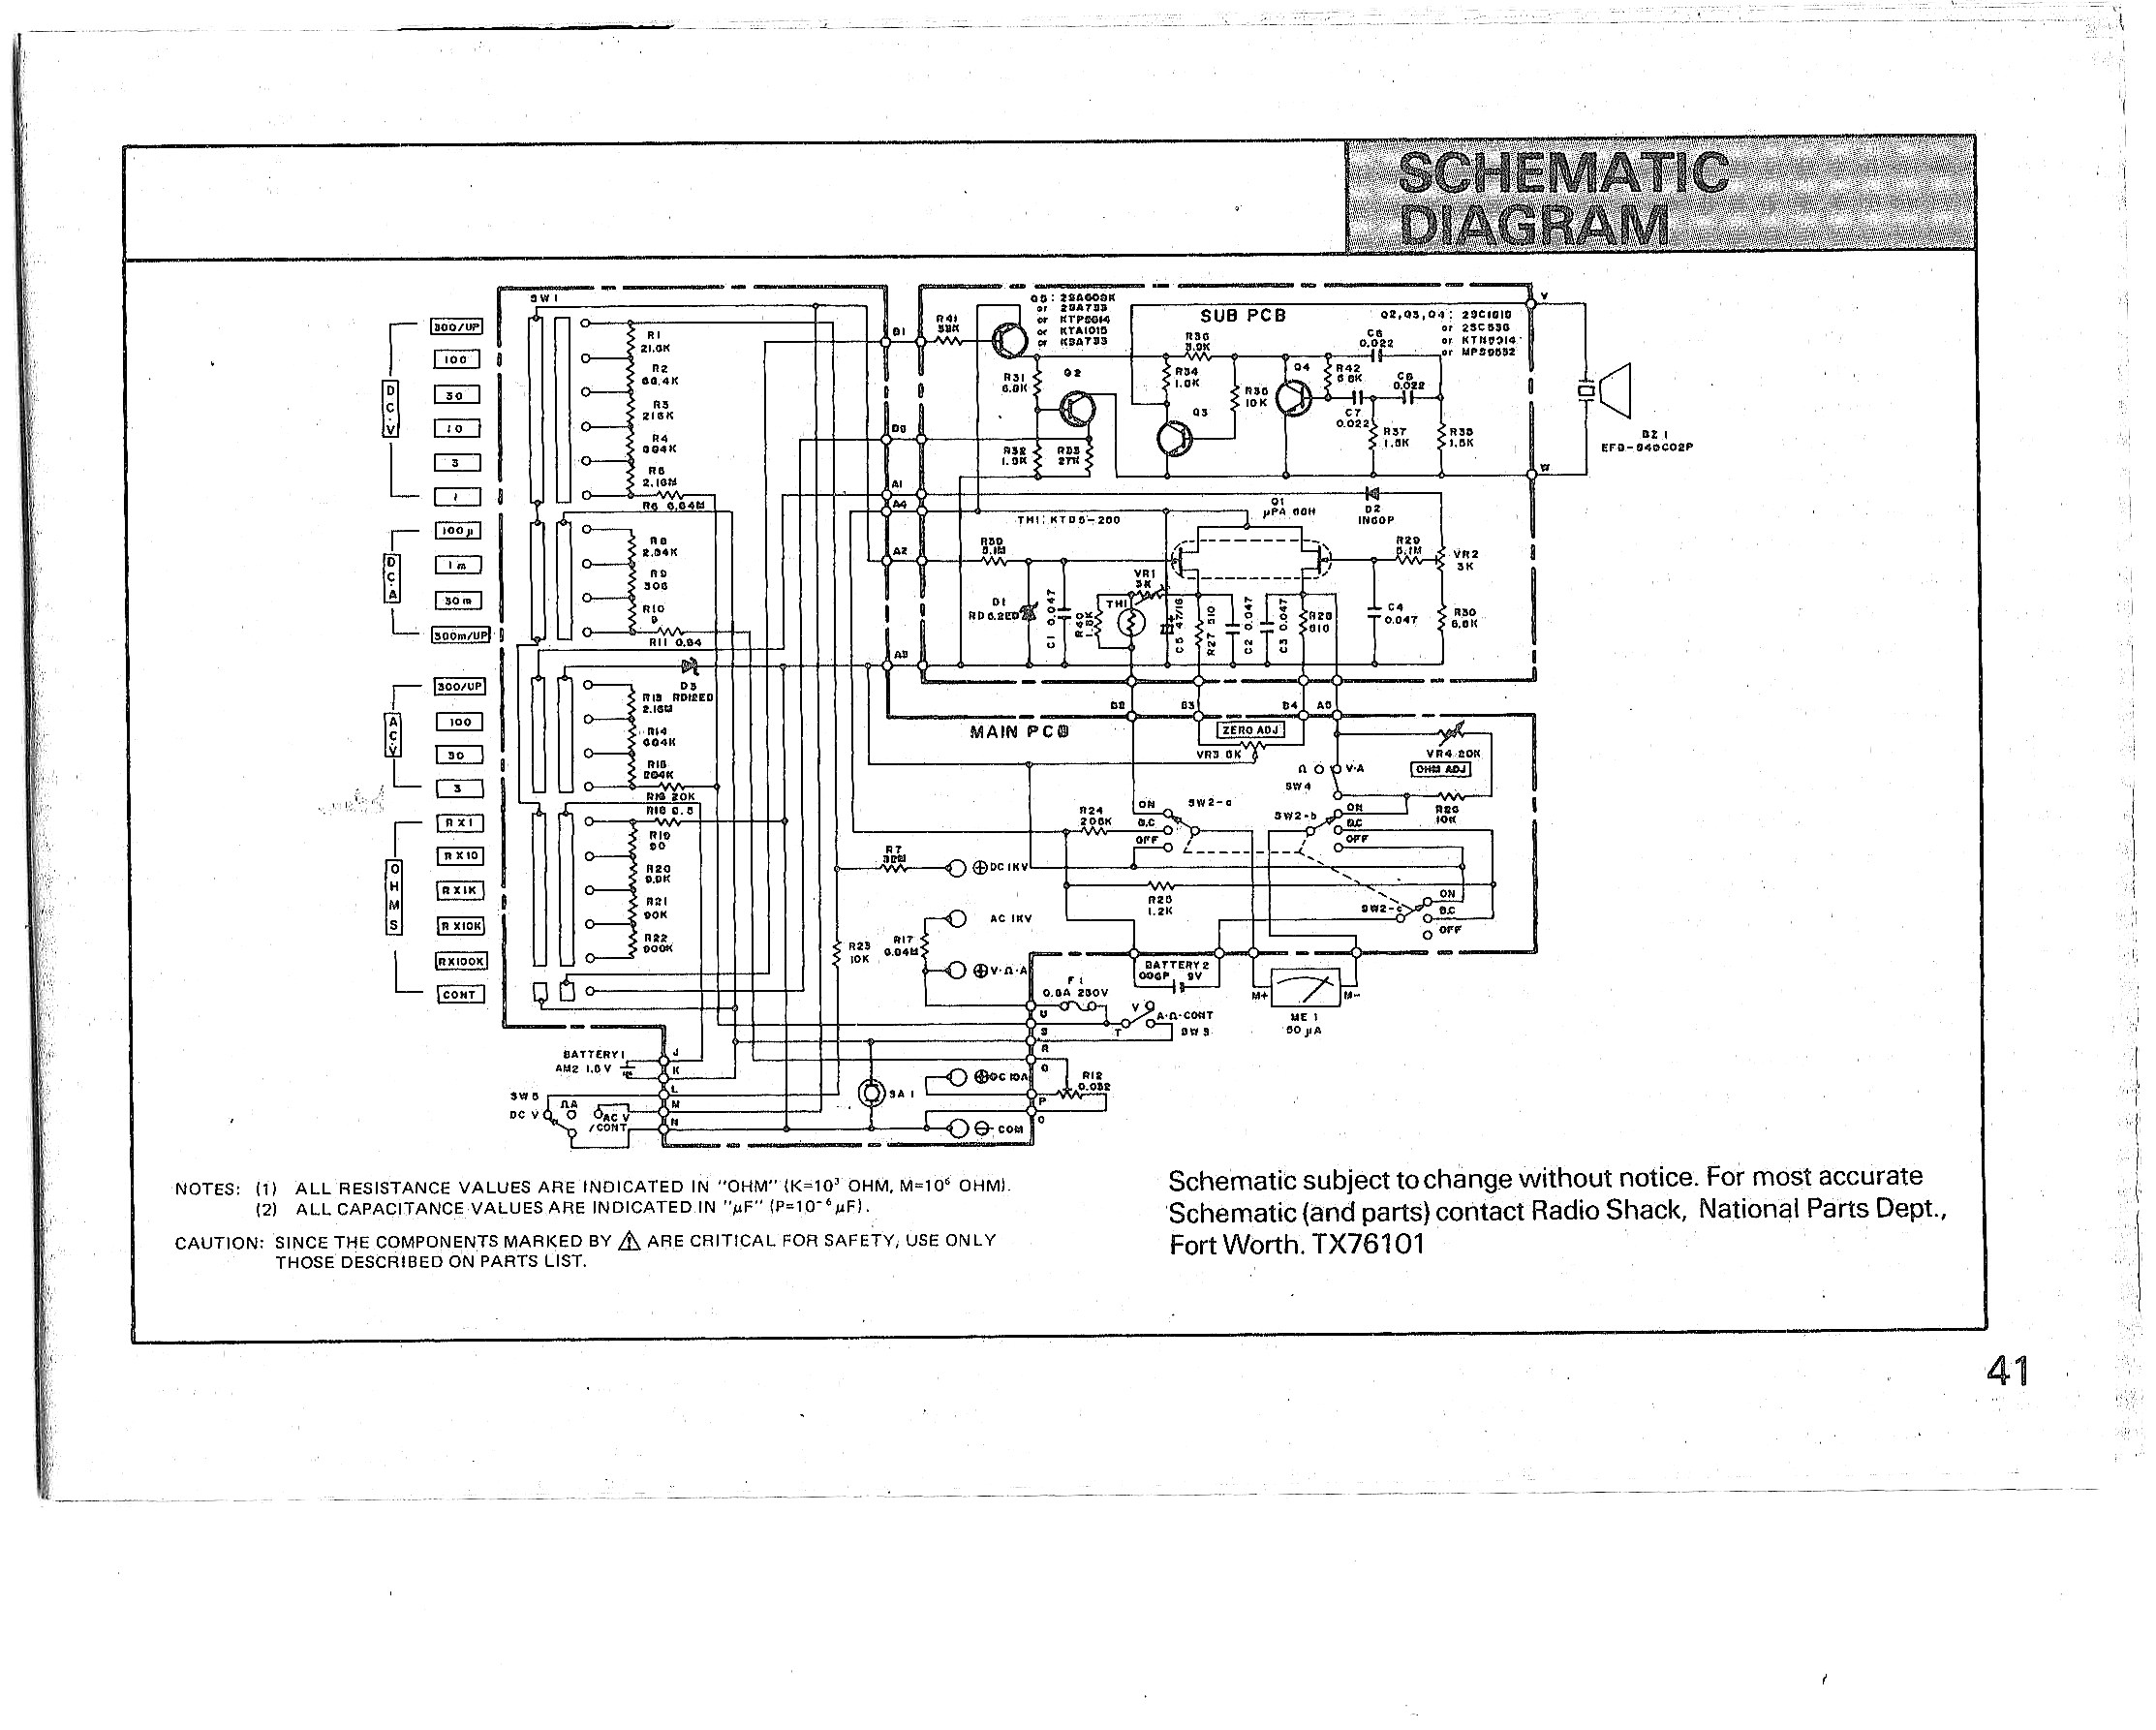 micronta 22-220a this is the original schmatic diagram for this multimeter. 22-220a